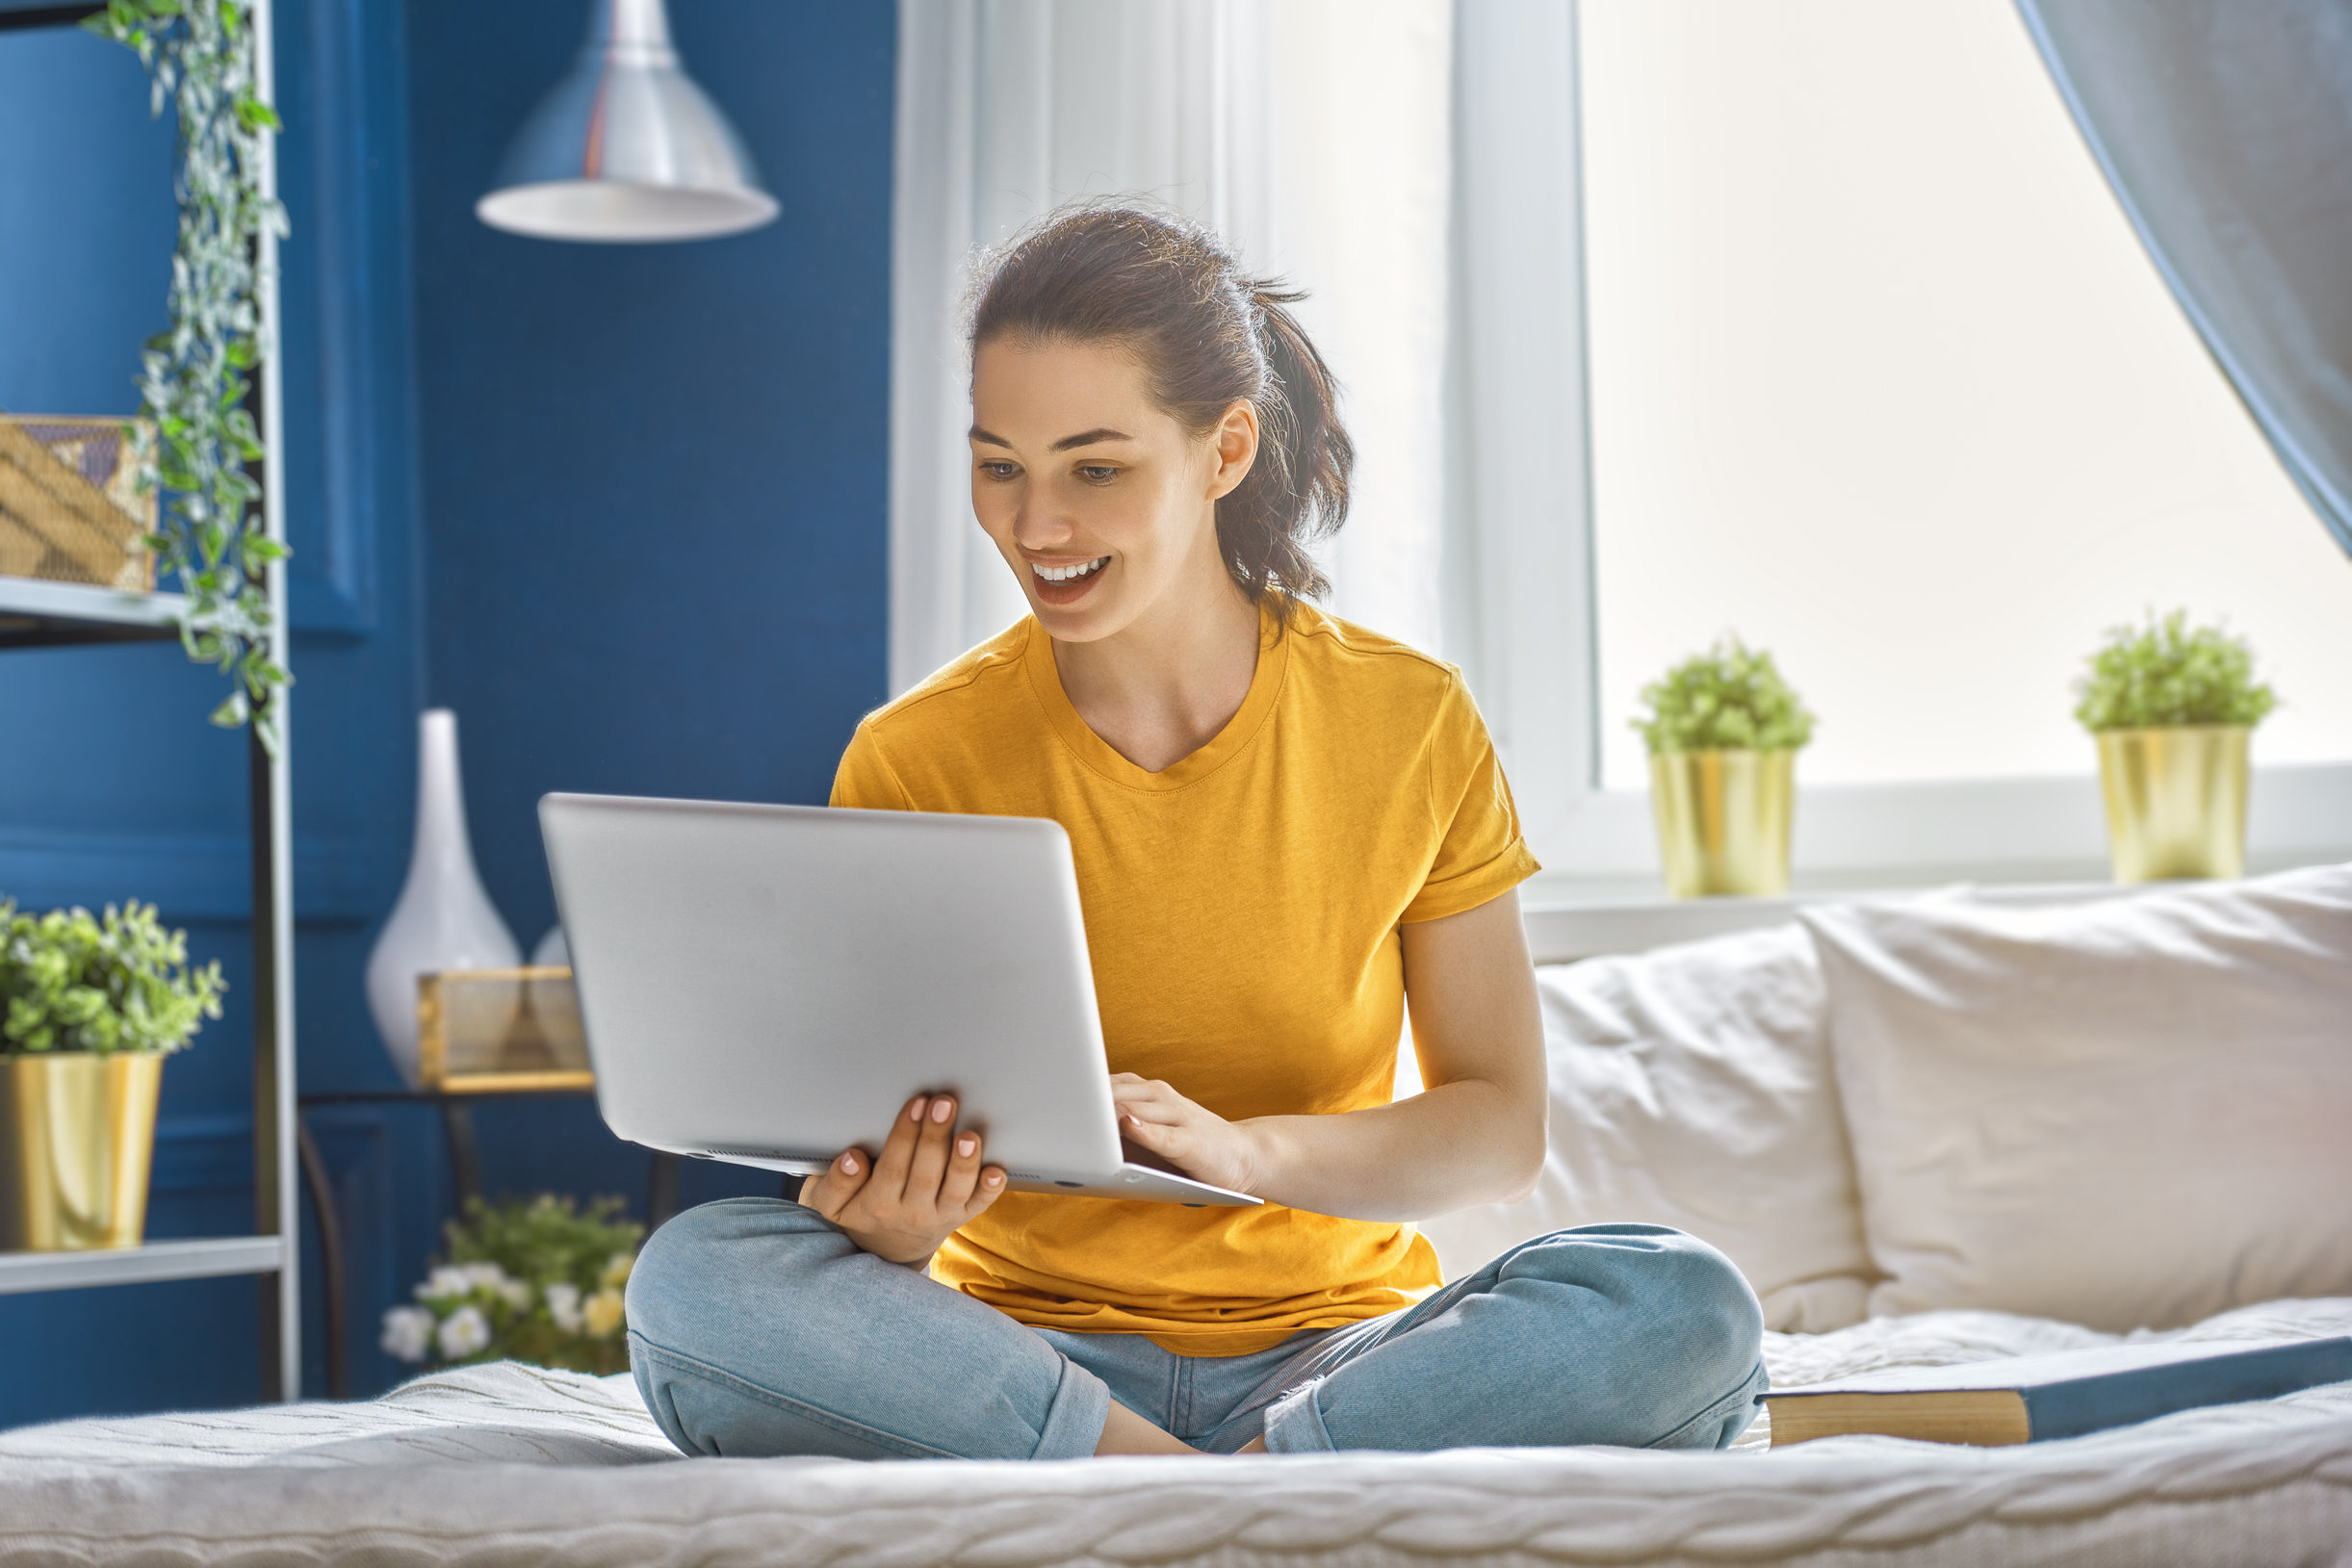 Image description: Person using laptop at home to search for down payment assistance programs